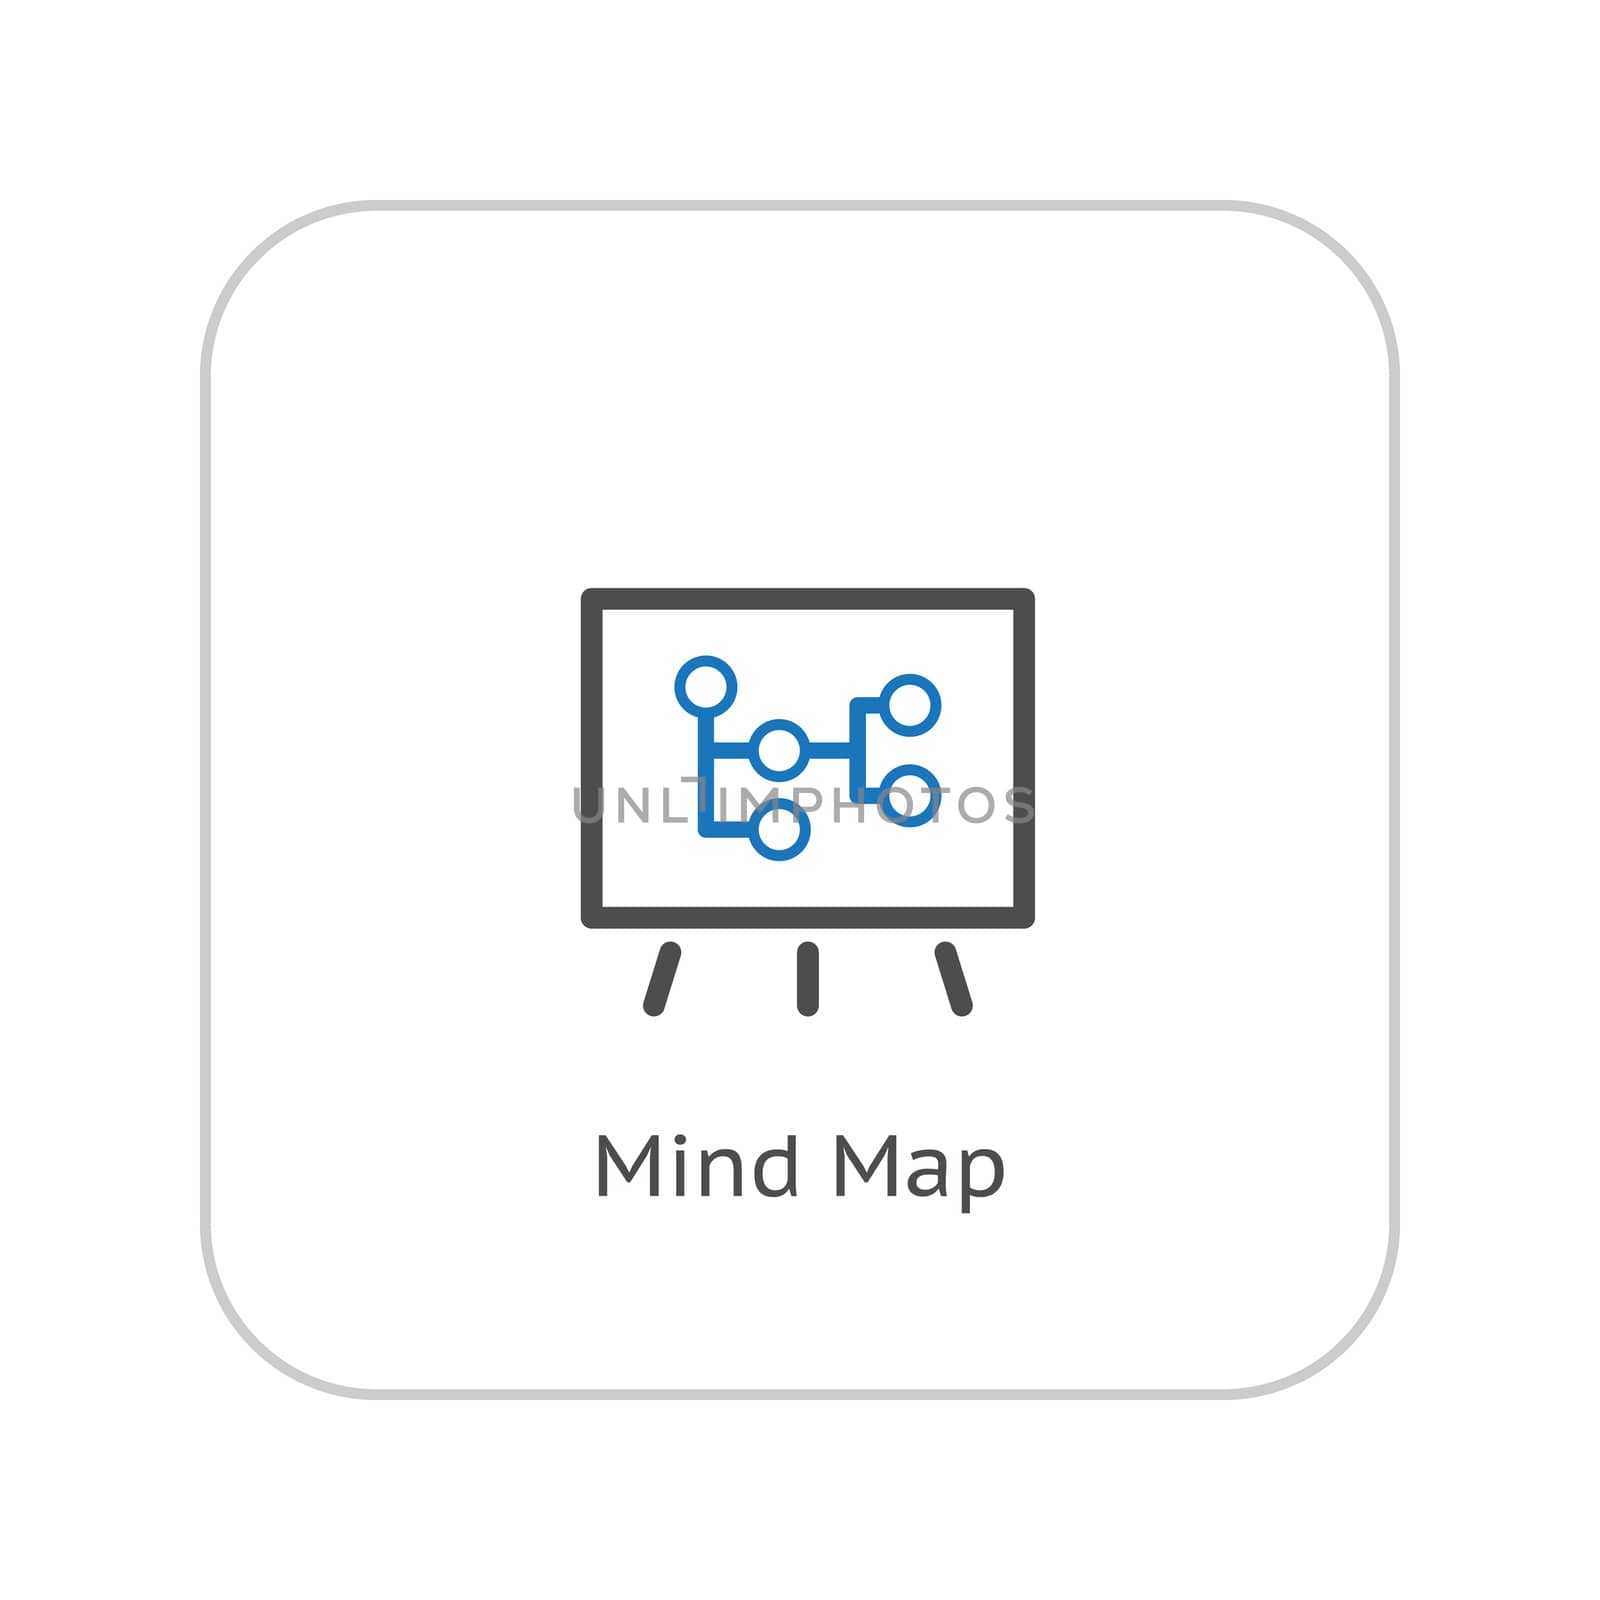 Mind Map Icon. Business Concept. Flat Design. Isolated Illustration.